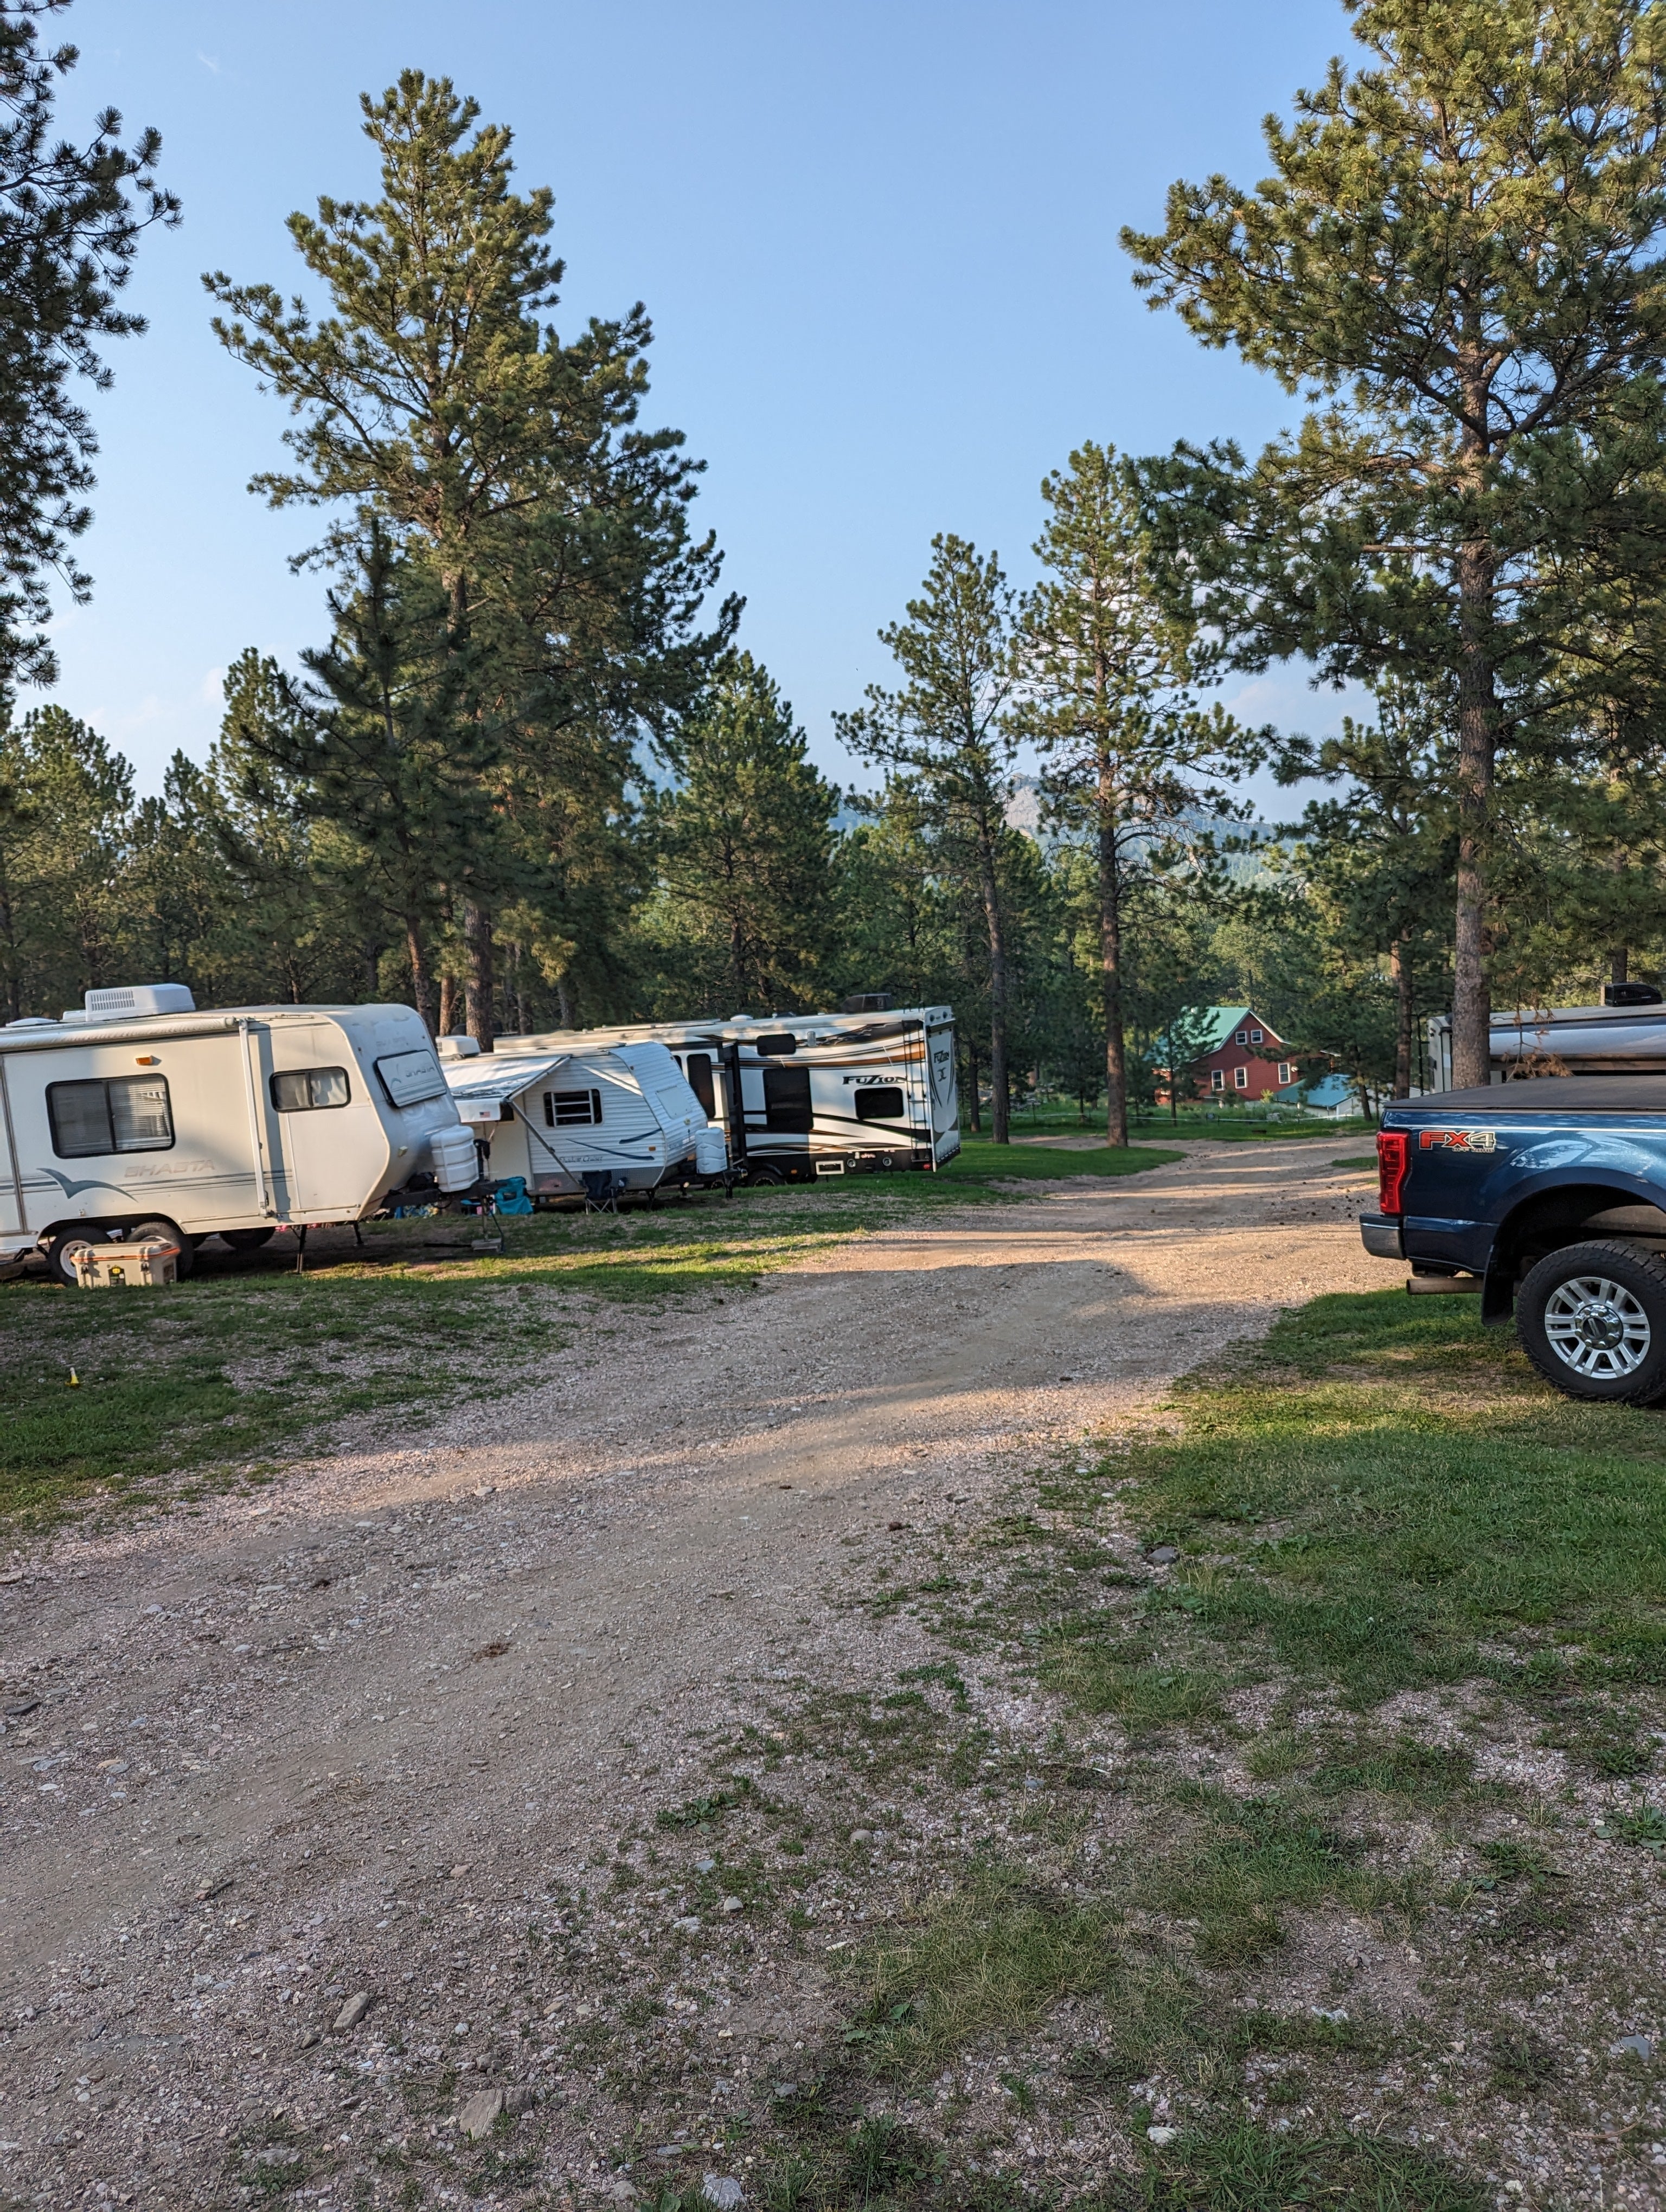 Camper submitted image from Custer Crazy Horse Campground & Cabin 13 Coffee Shop - 1